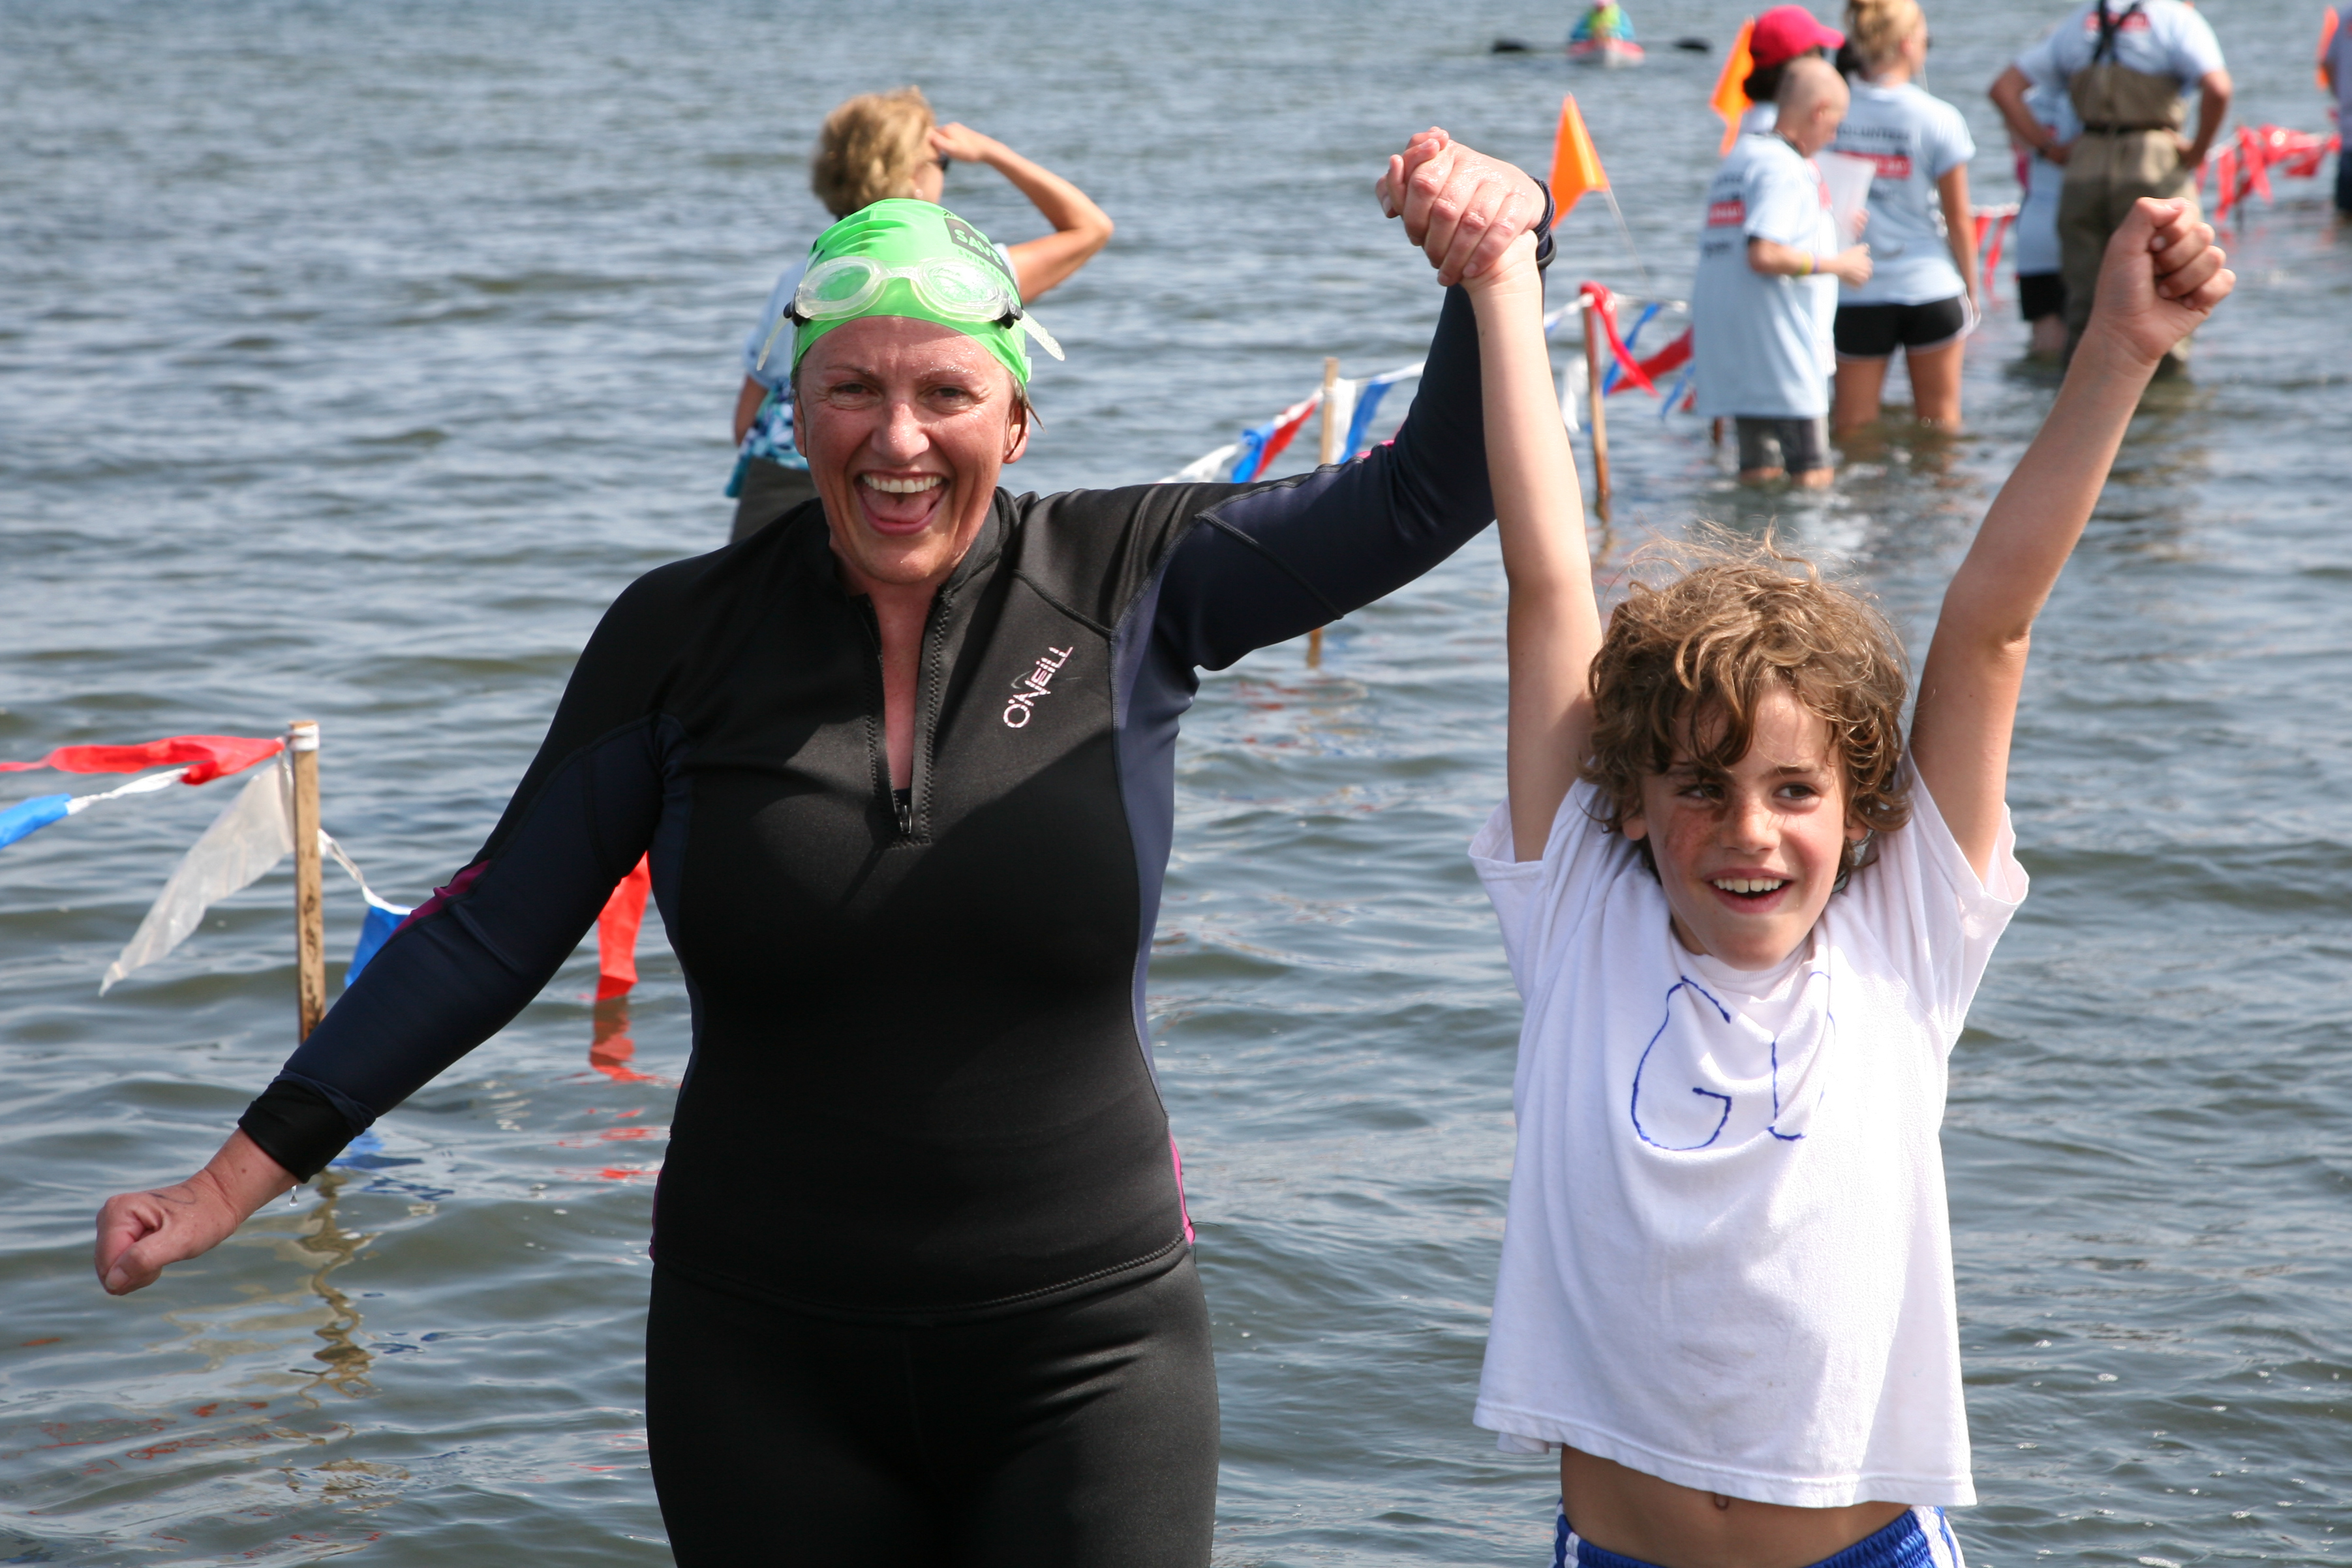 A woman in a wetsuit emerges from the finish funnel at Save The Bay's annual Swim fundraiser, holding the hand of a young boy who is cheering for her.